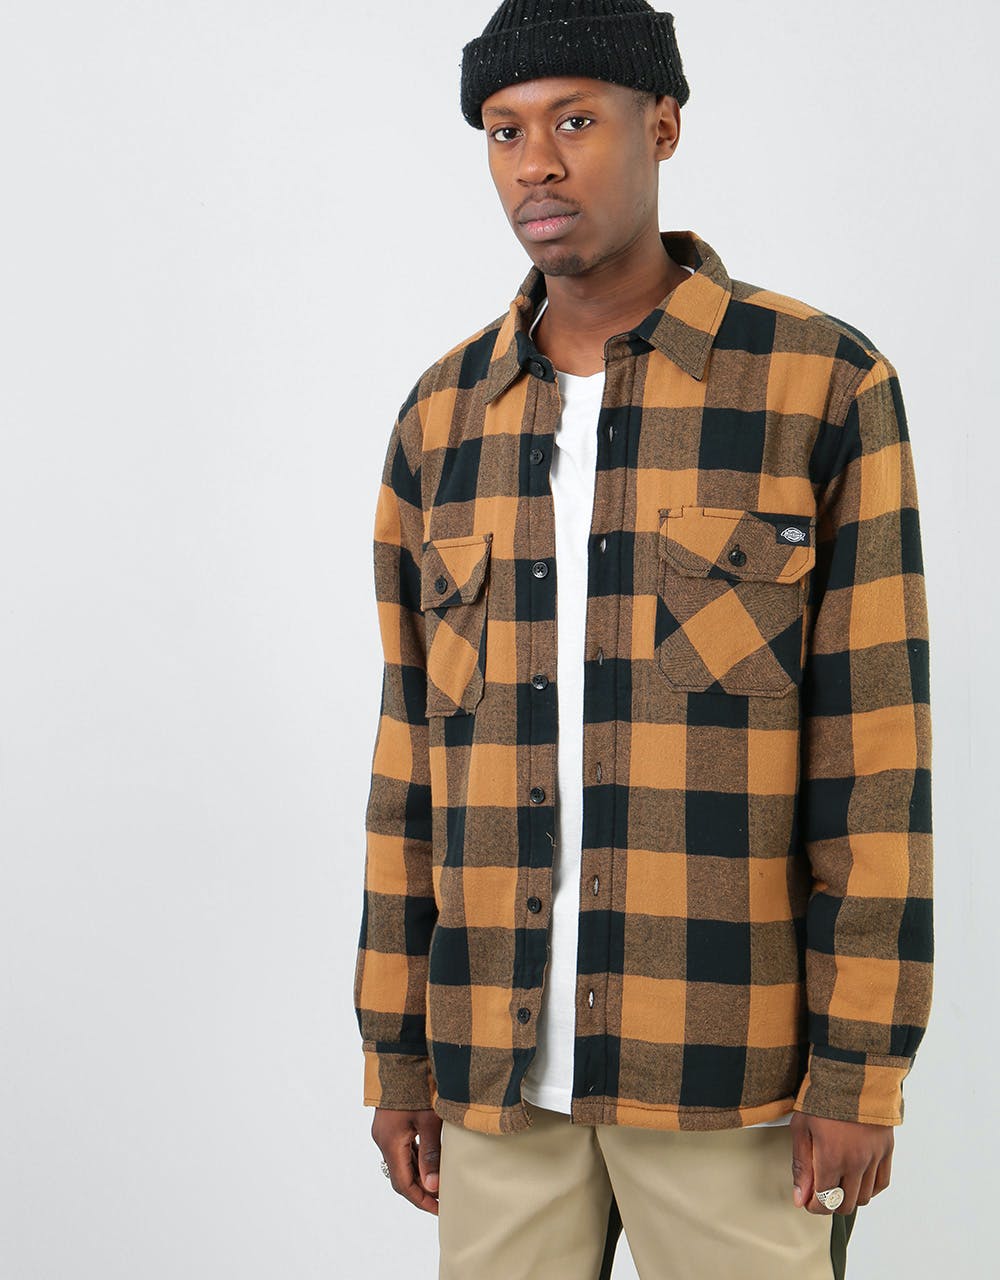 Dickies Lansdale L/S Sherpa Lined Shirt - Brown Duck